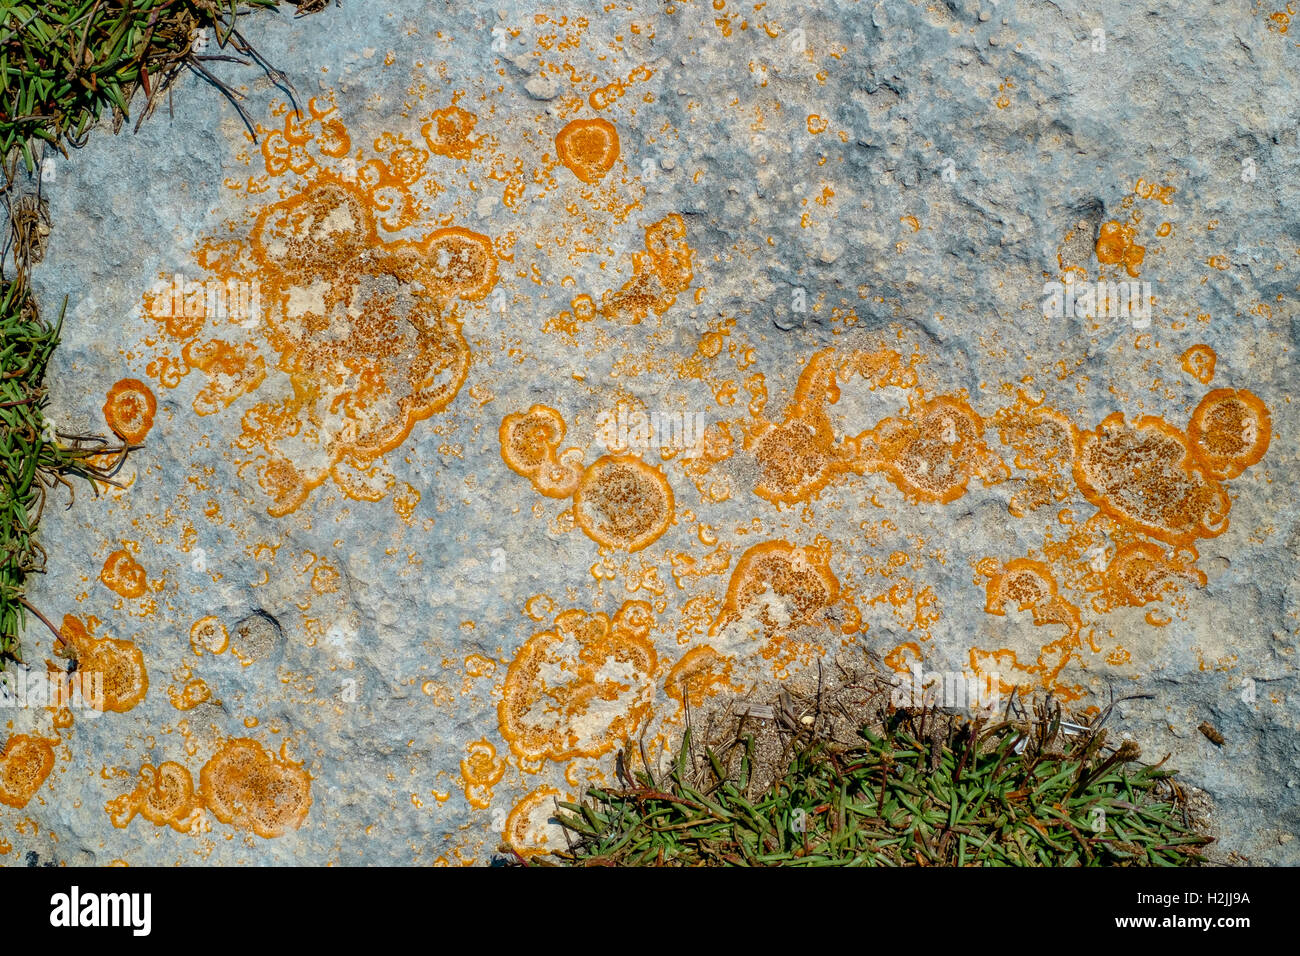 Close-up of orange lichens on gray rock surface Stock Photo